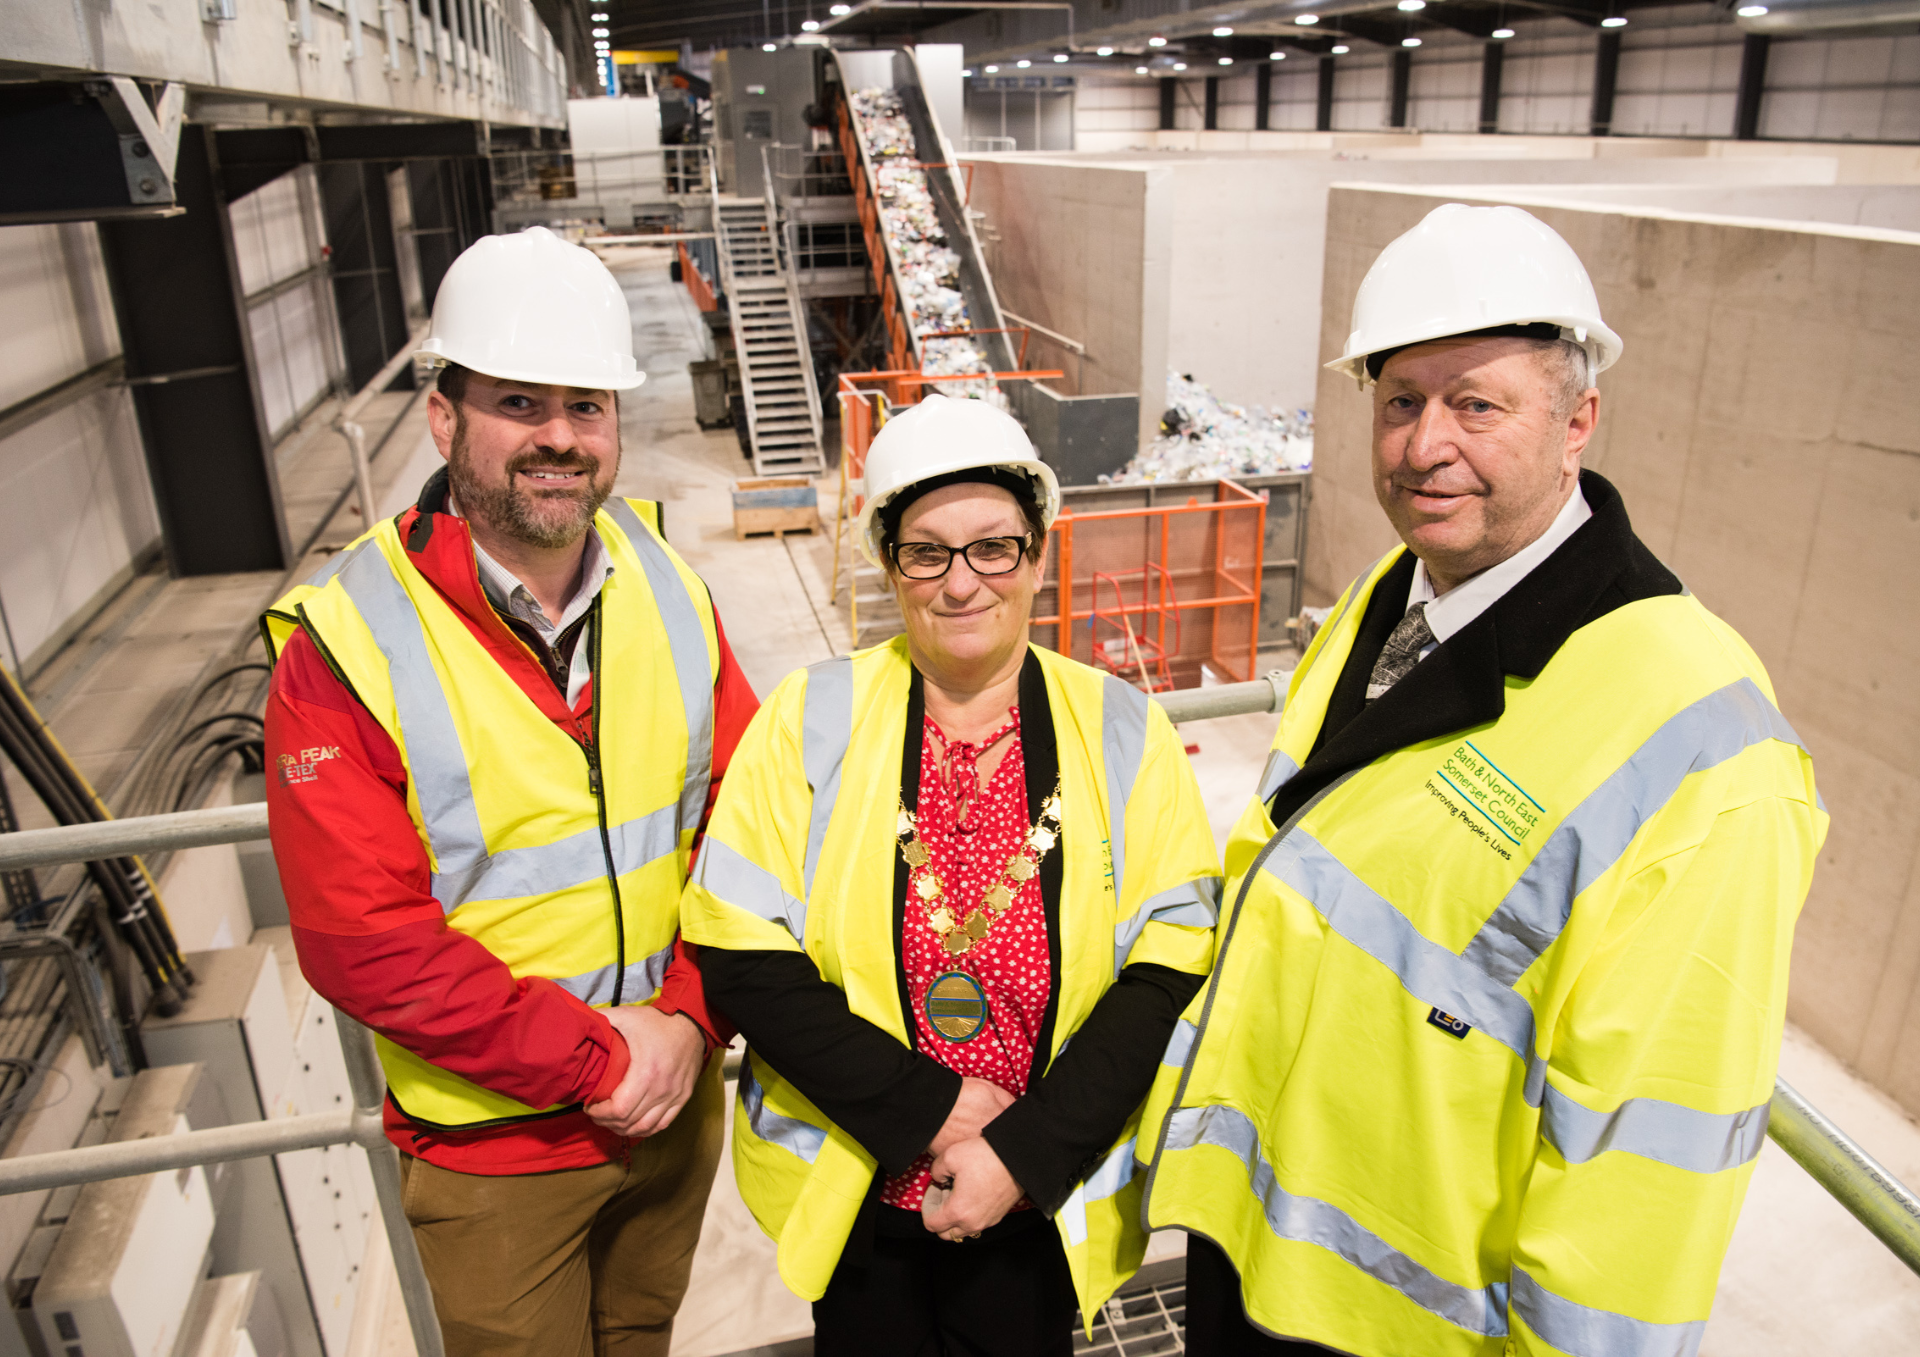 Cllr Kevin Guy (Council Leader), Cllr Sarah Moore (Council Chair) and Cllr Tim Ball ( Cabinet Member for Neighbourhood Services) officially open Keynsham Recycling Hub, photo courtesy of Bath & North East Somerset Council.  